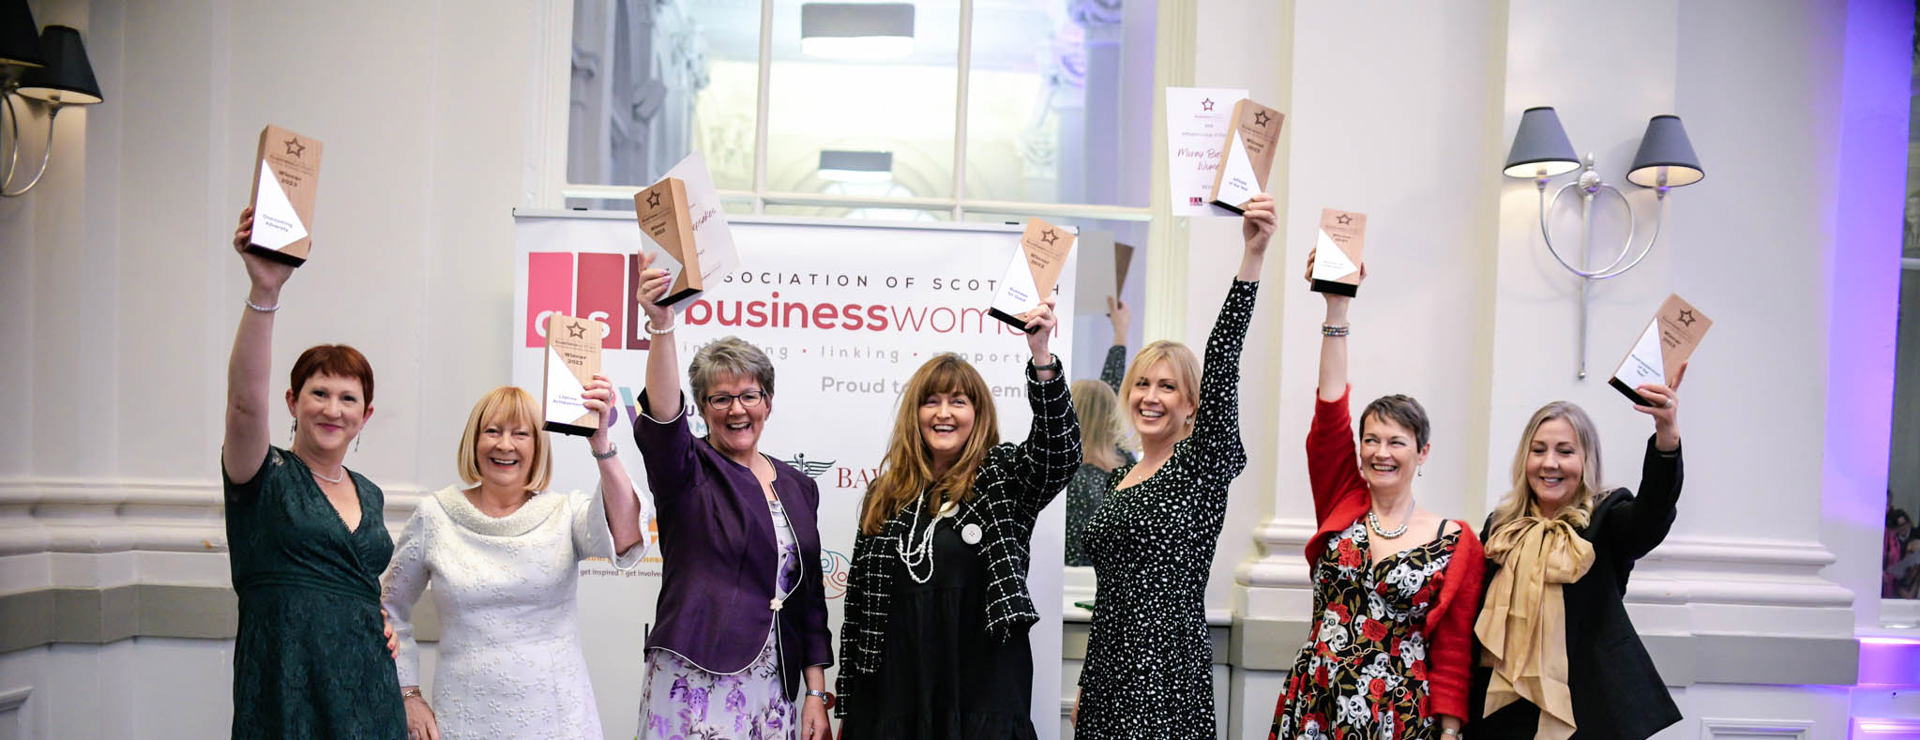 Inspiring, linking & supporting women in business across Scotland